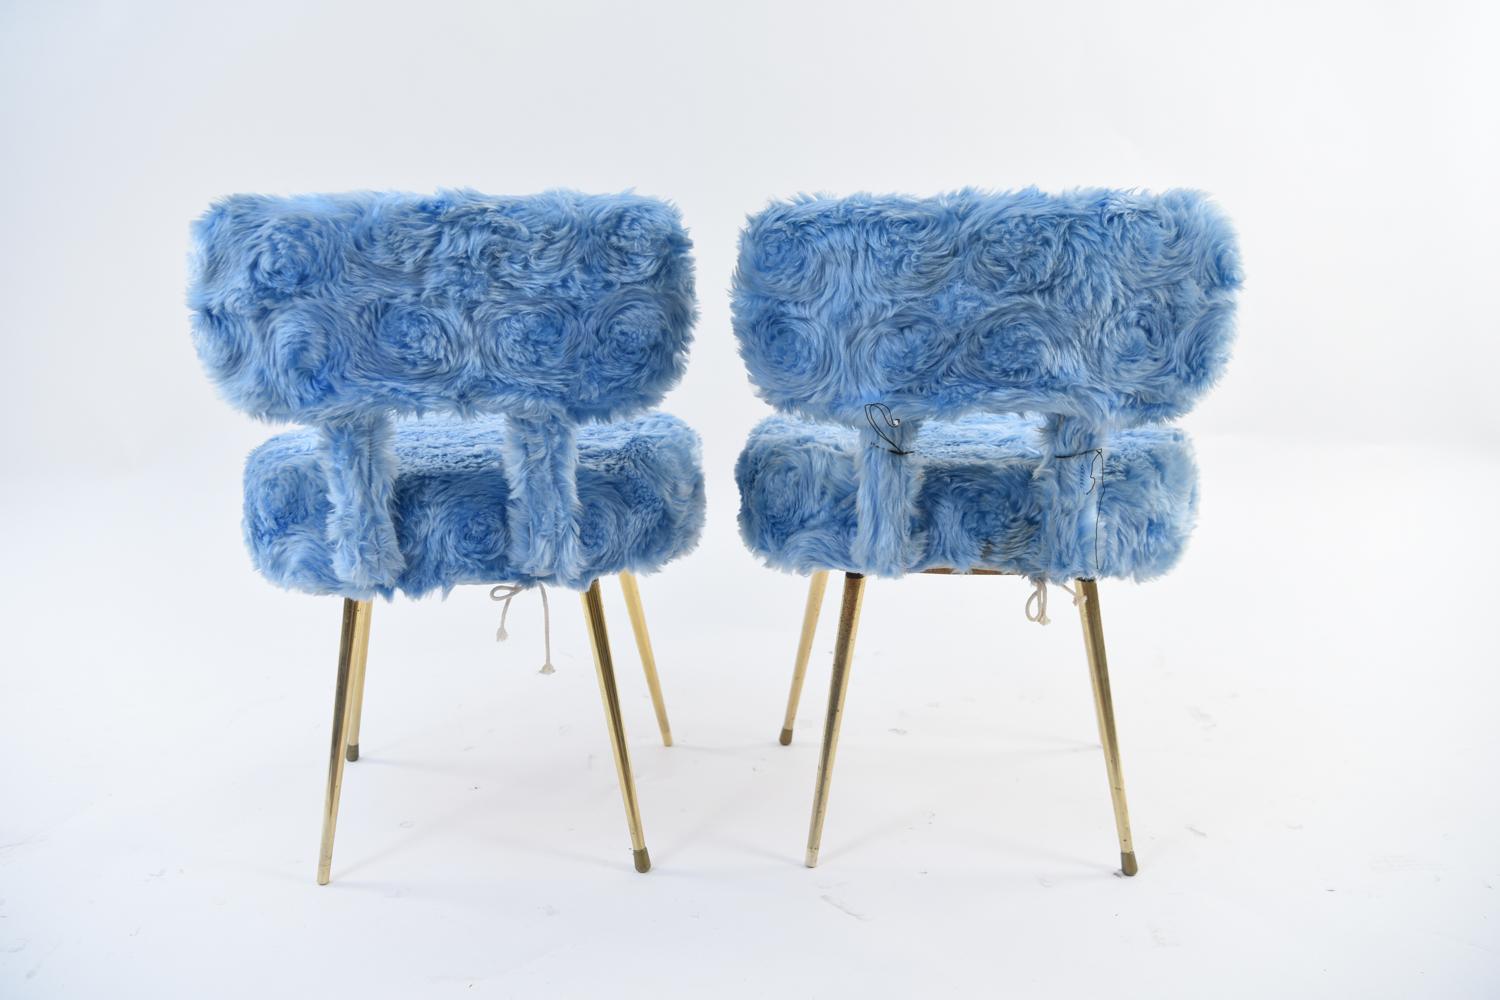 A stylish and comfortable pair of small side chairs featuring aquamarine blue faux-fur slipcovers. Slipcovers are easily removable for effortless cleaning and reupholstering! Chairs are constructed from bent plywood, sturdy particle board, and metal